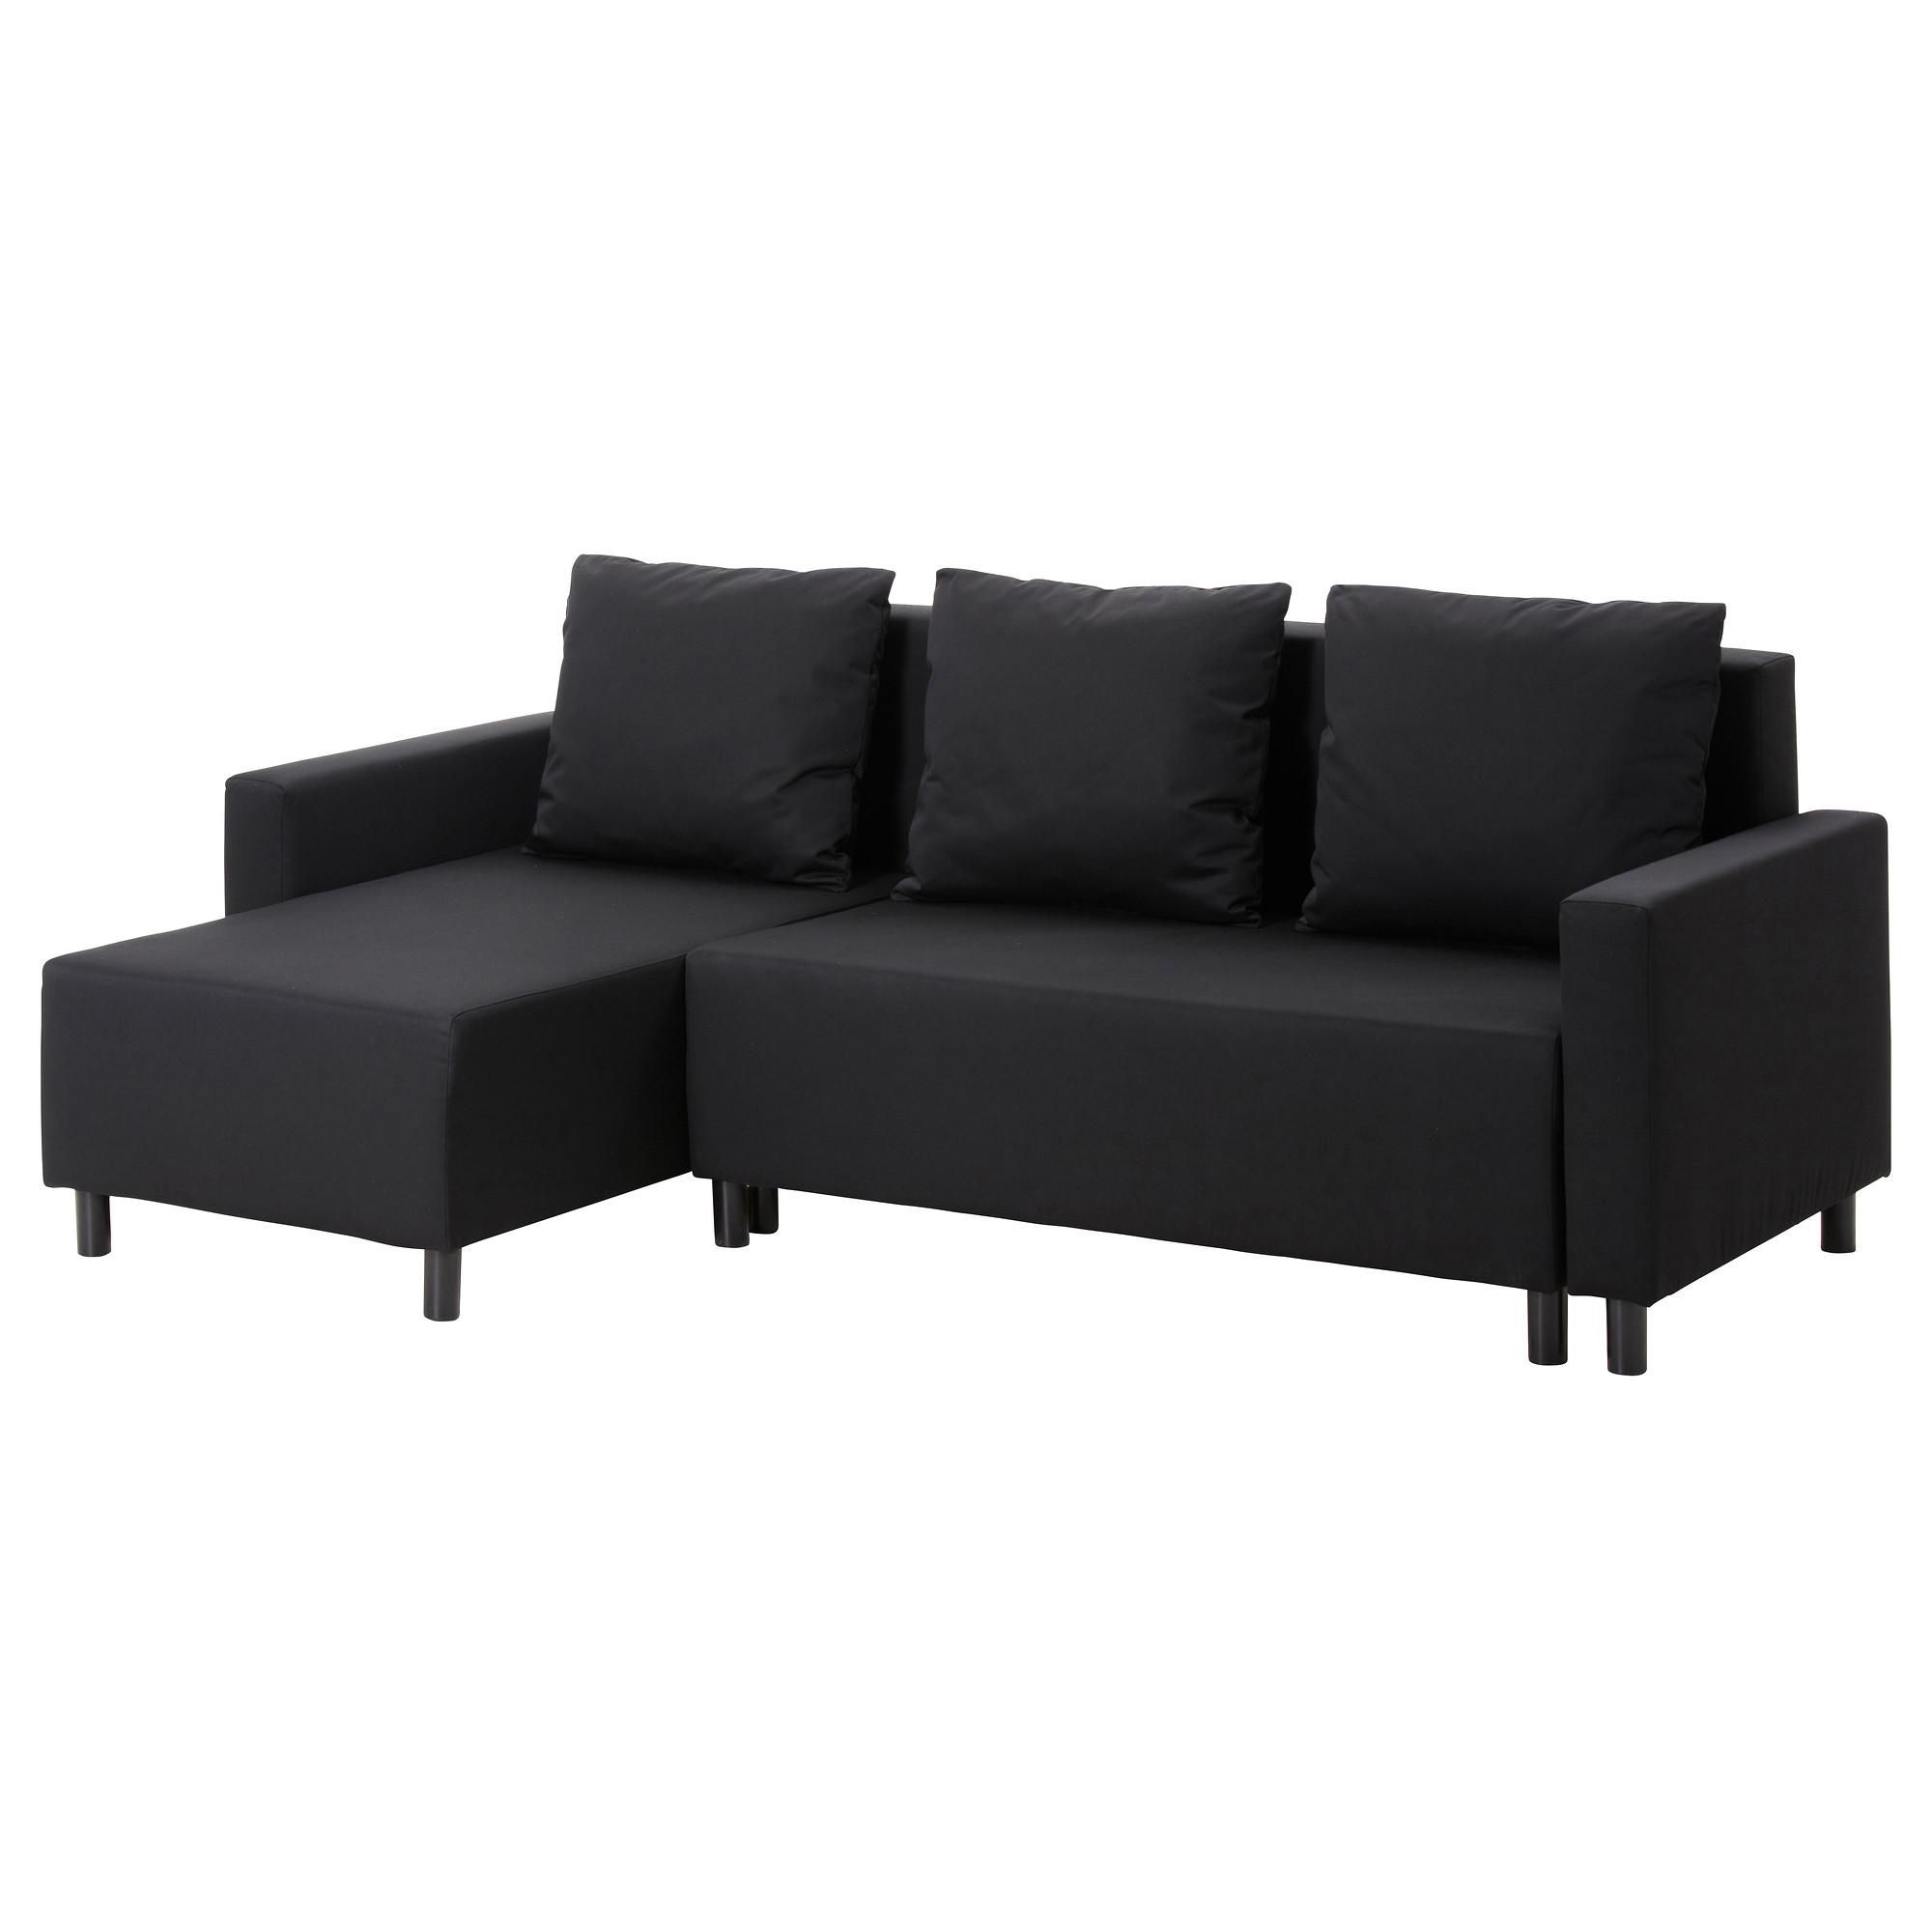 Sleeper Sofas & Chair Beds – Ikea Pertaining To Sofa Beds Chairs (View 14 of 20)